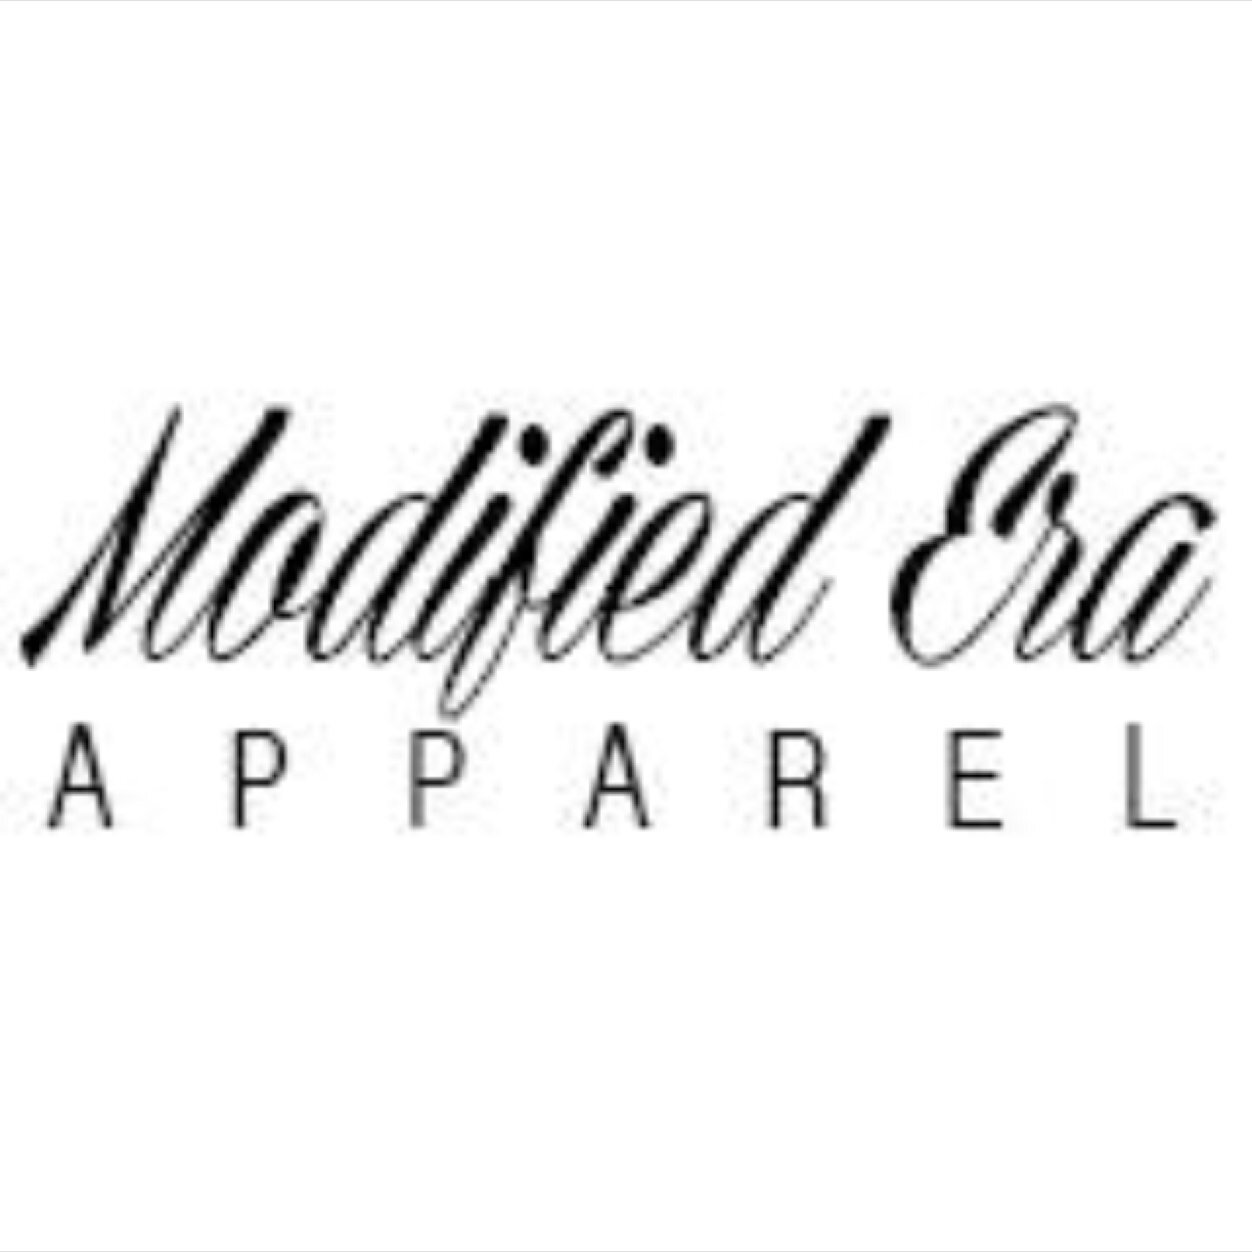 Independent Streetwear Clothing Co.